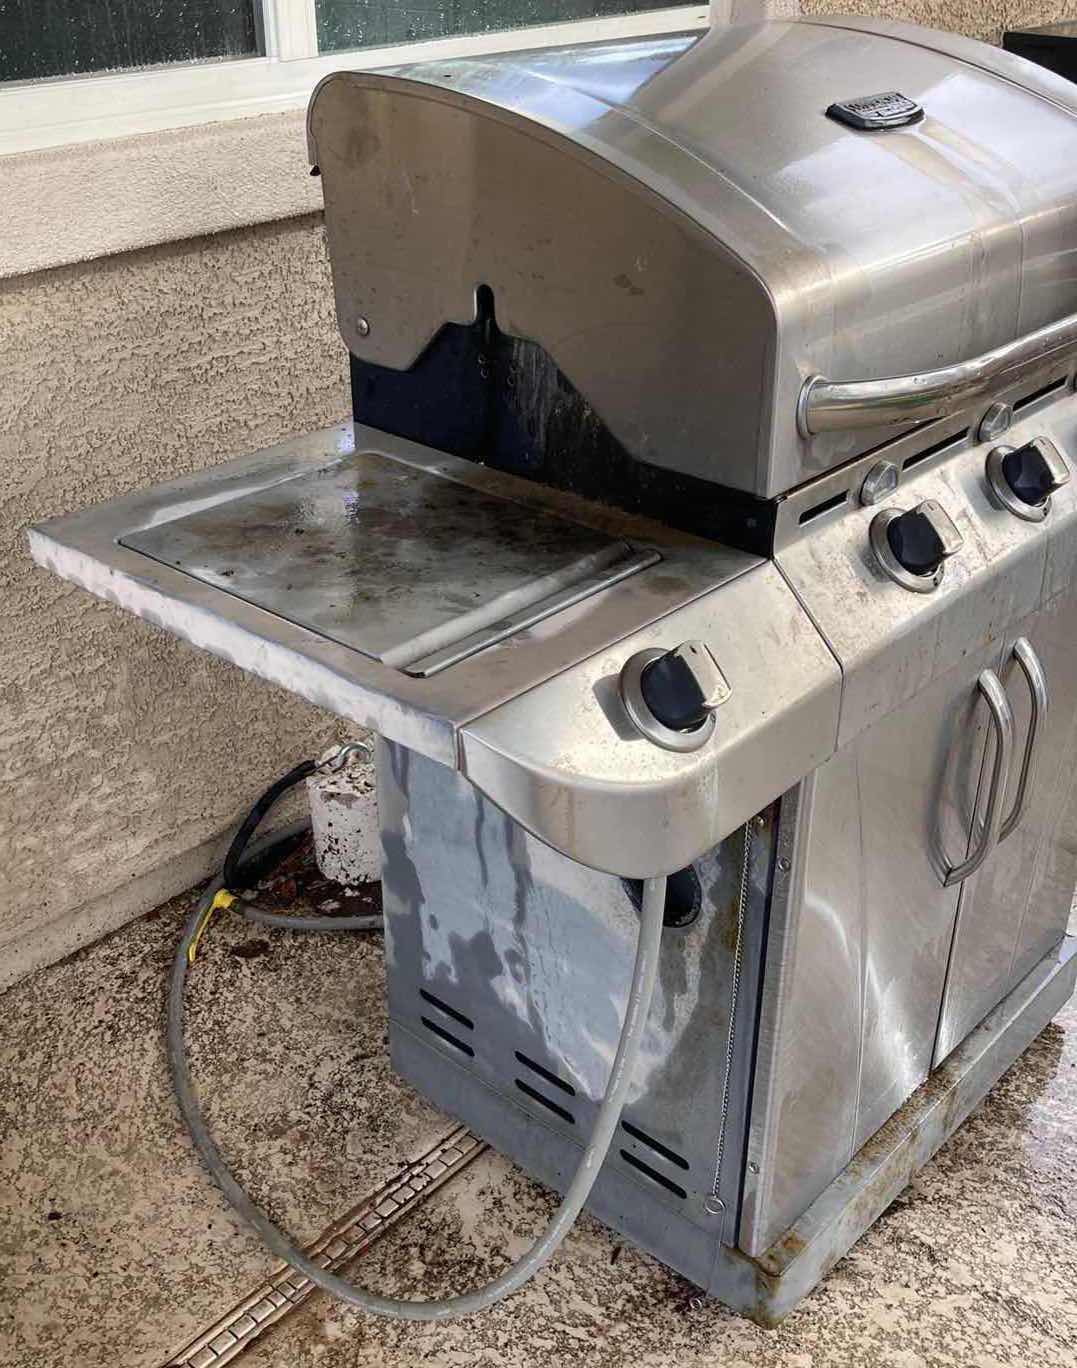 Photo 2 of CHARBROIL COMMERCIAL INFRARED PROPANE GRILL MODEL 463257111 W PROPANE TANK (PARTIALLY FULL)